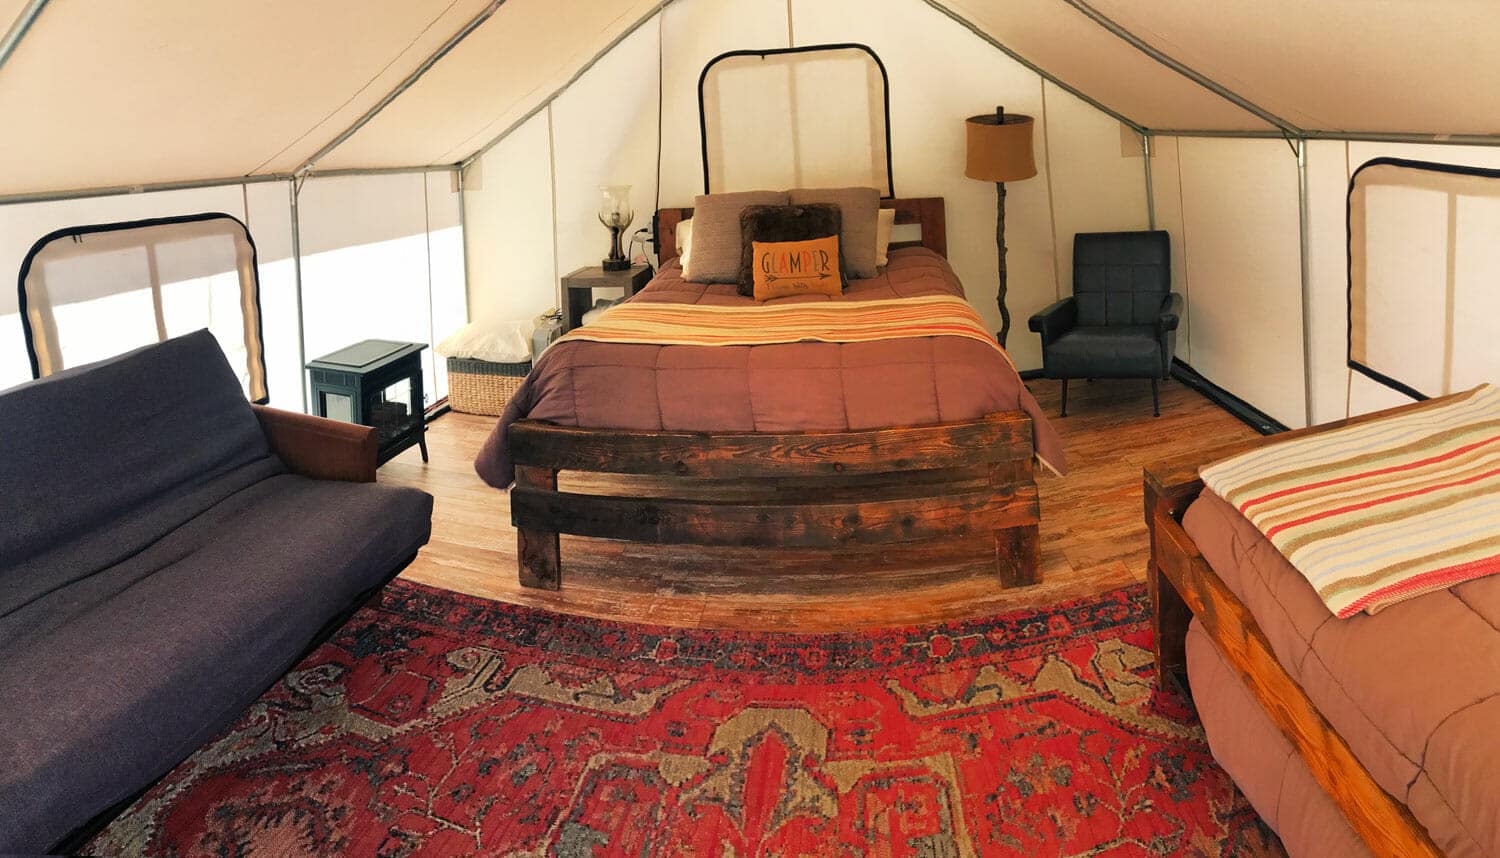 Take a peek inside one of our Zion Glamping tents at Zion Ponderosa